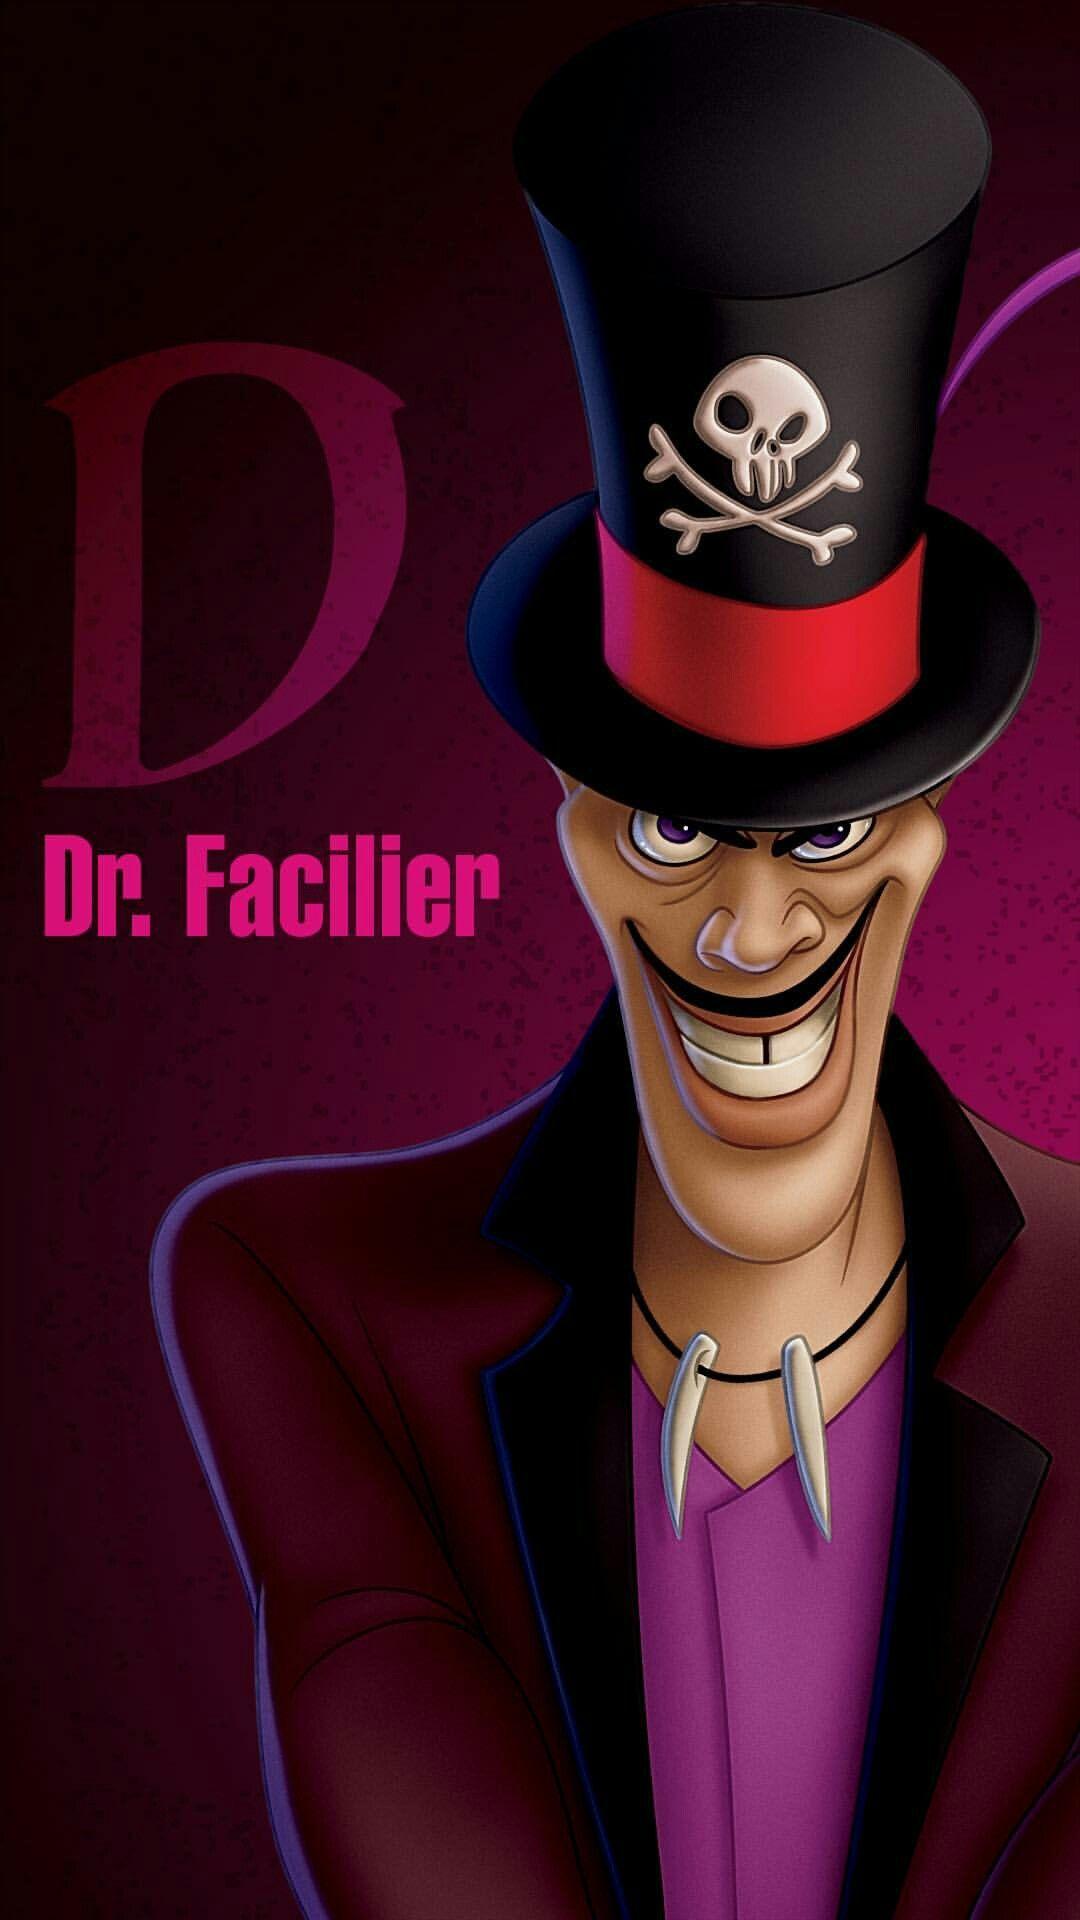 Dr. Facilier Wallpapers - Wallpaper Cave